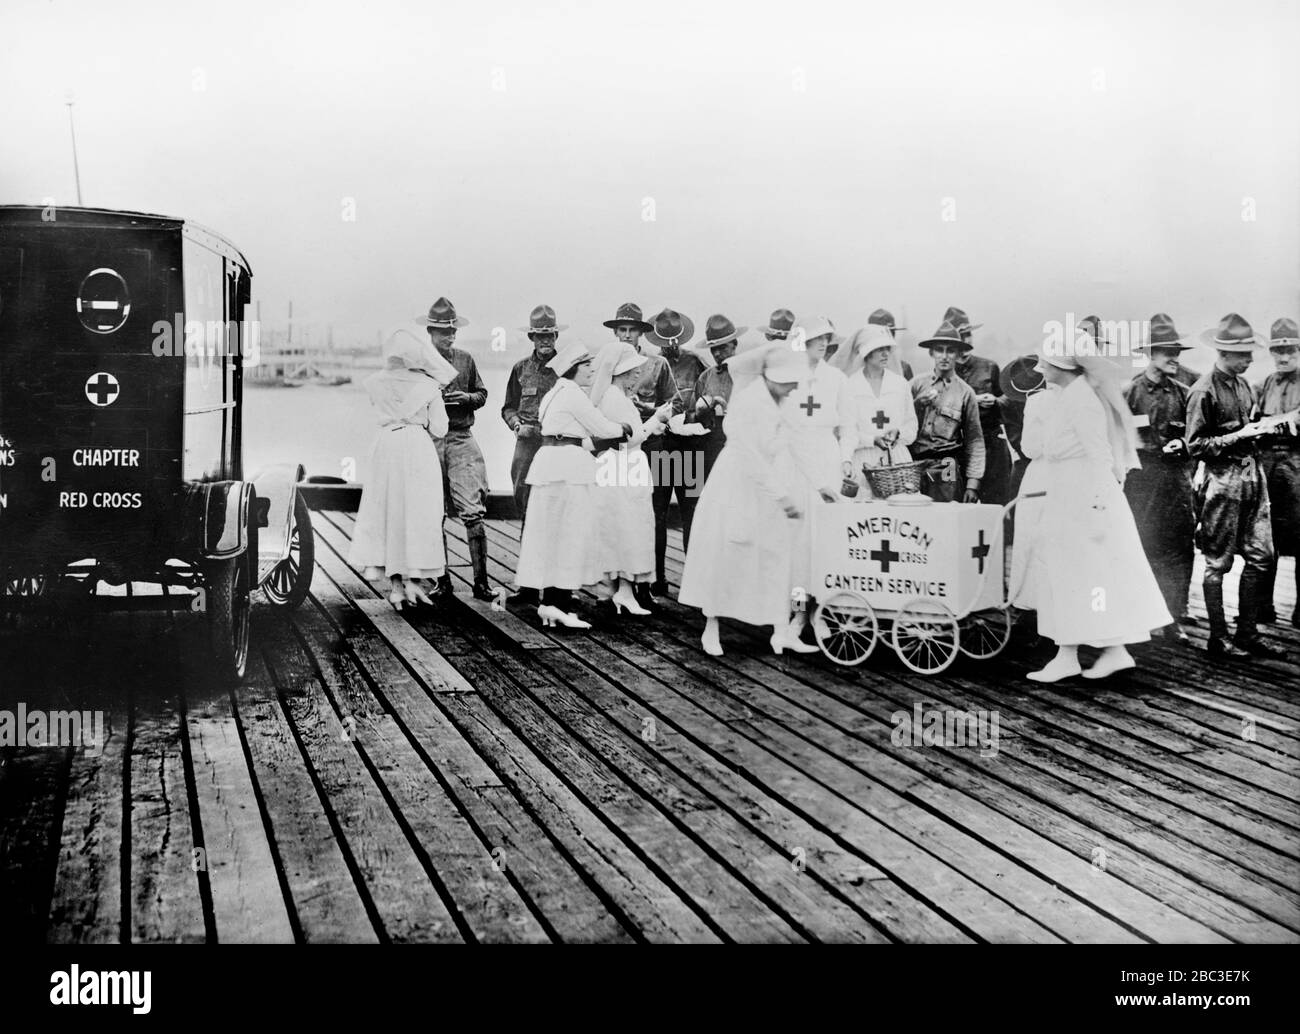 American Red Cross Canteen Service durante l'epidemia di influenza, New Orleans, Louisiana, USA, American National Red Cross Photograph Collection, febbraio 1919 Foto Stock